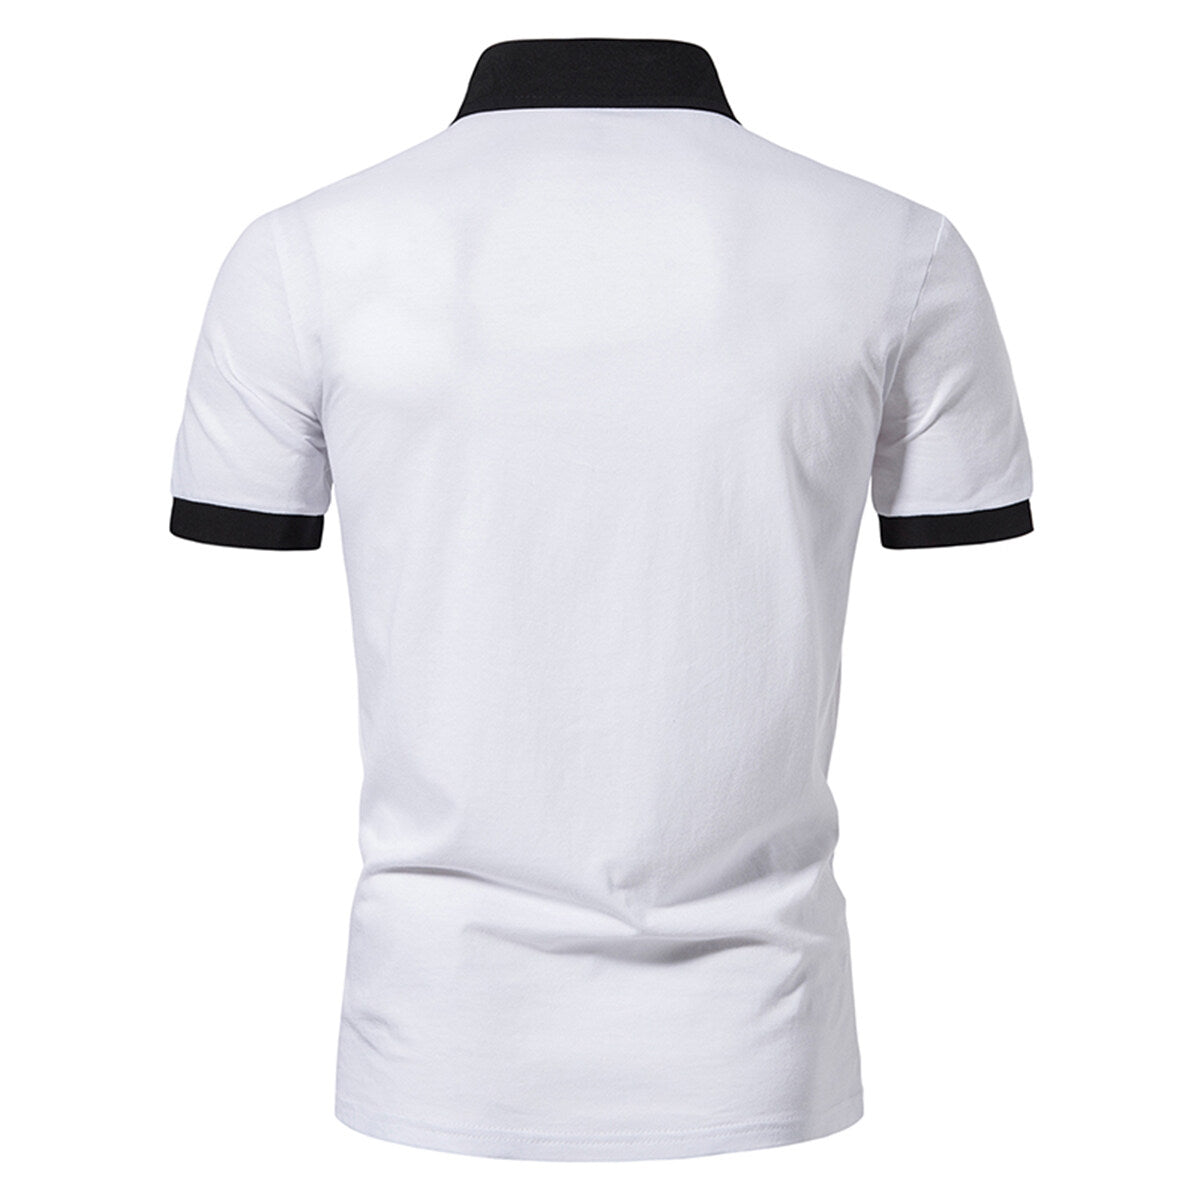 Men's Colorful Patchwork Polo Neck Short Sleeve T-Shirt White